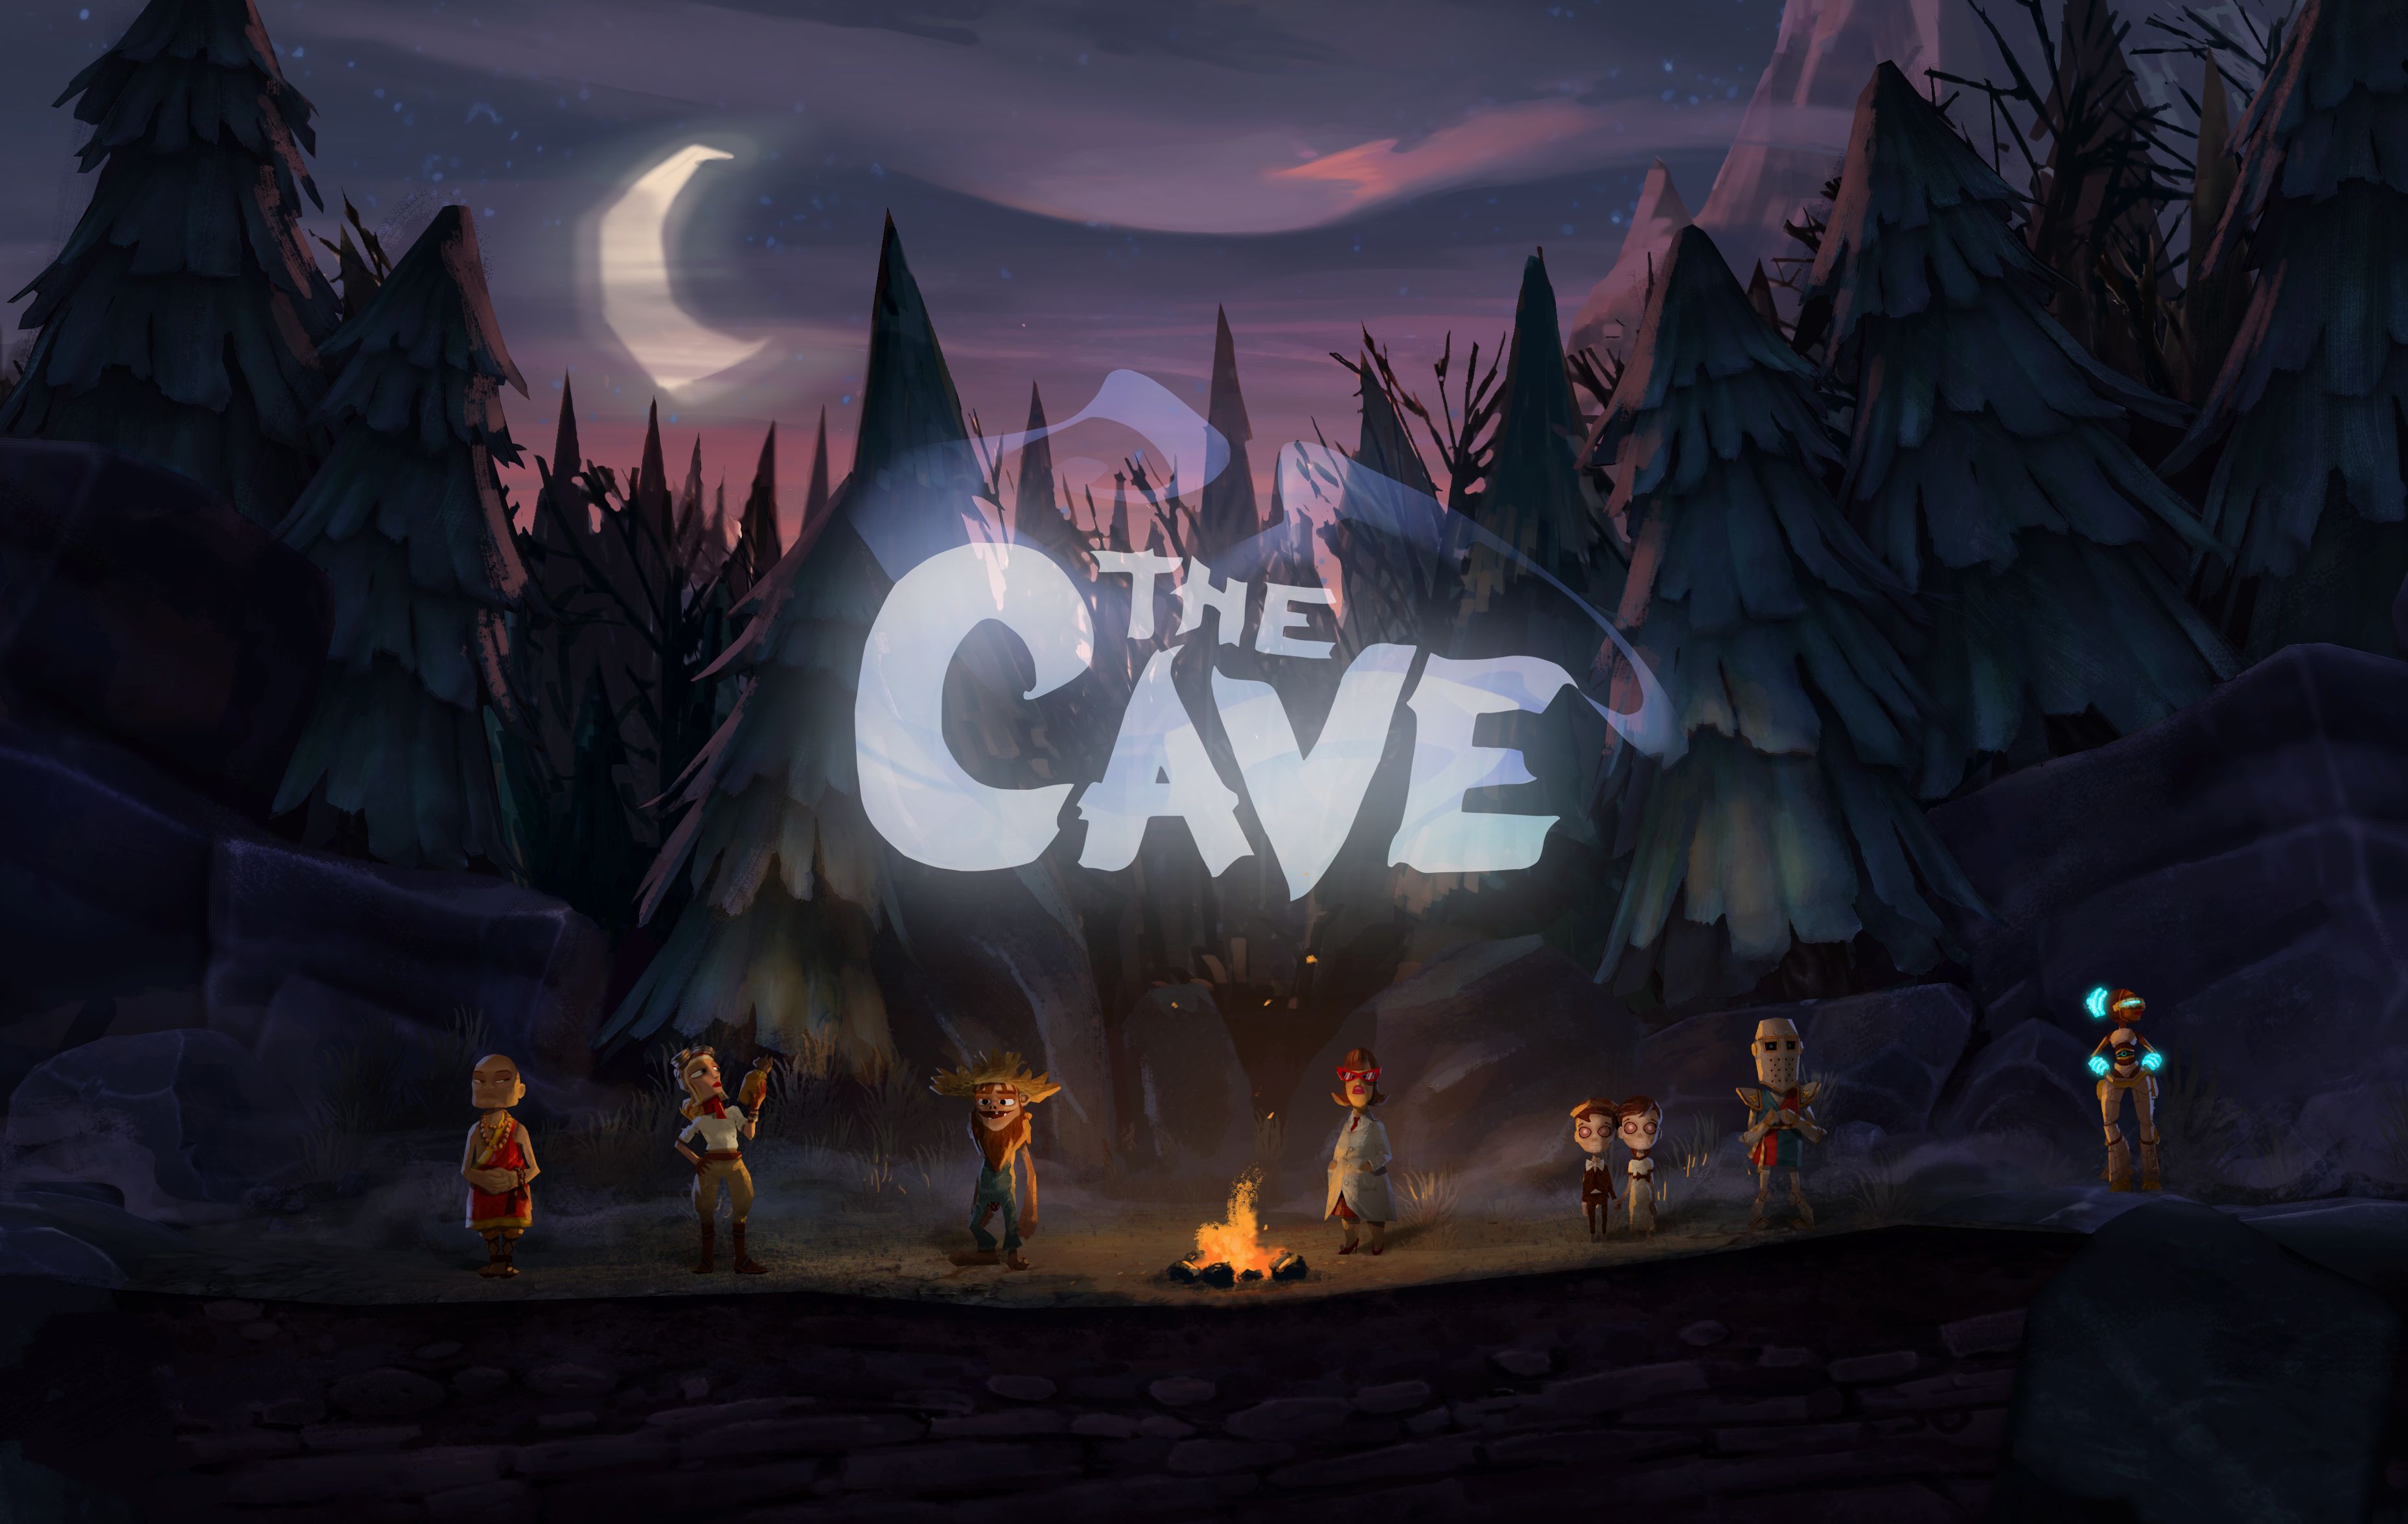 Cave v. Кейв игра. The Cave Xbox 360. The Cave Xbox 360 обложка. Игра the Cave 2.